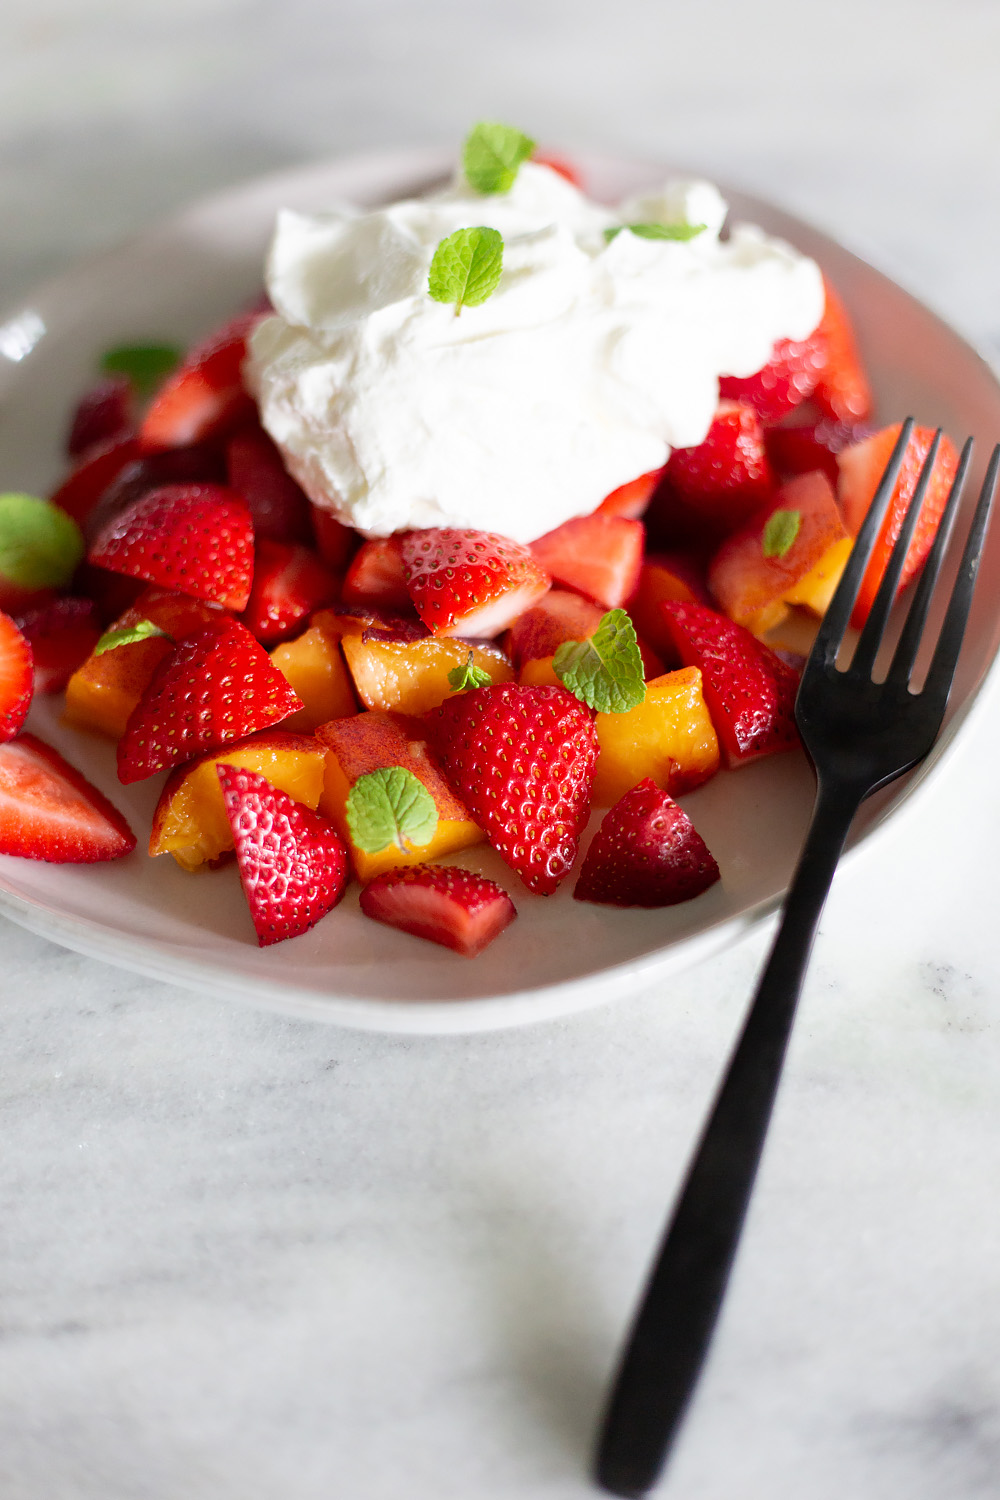 Peaches and Strawberries with Almond Whipped Cream with a fork